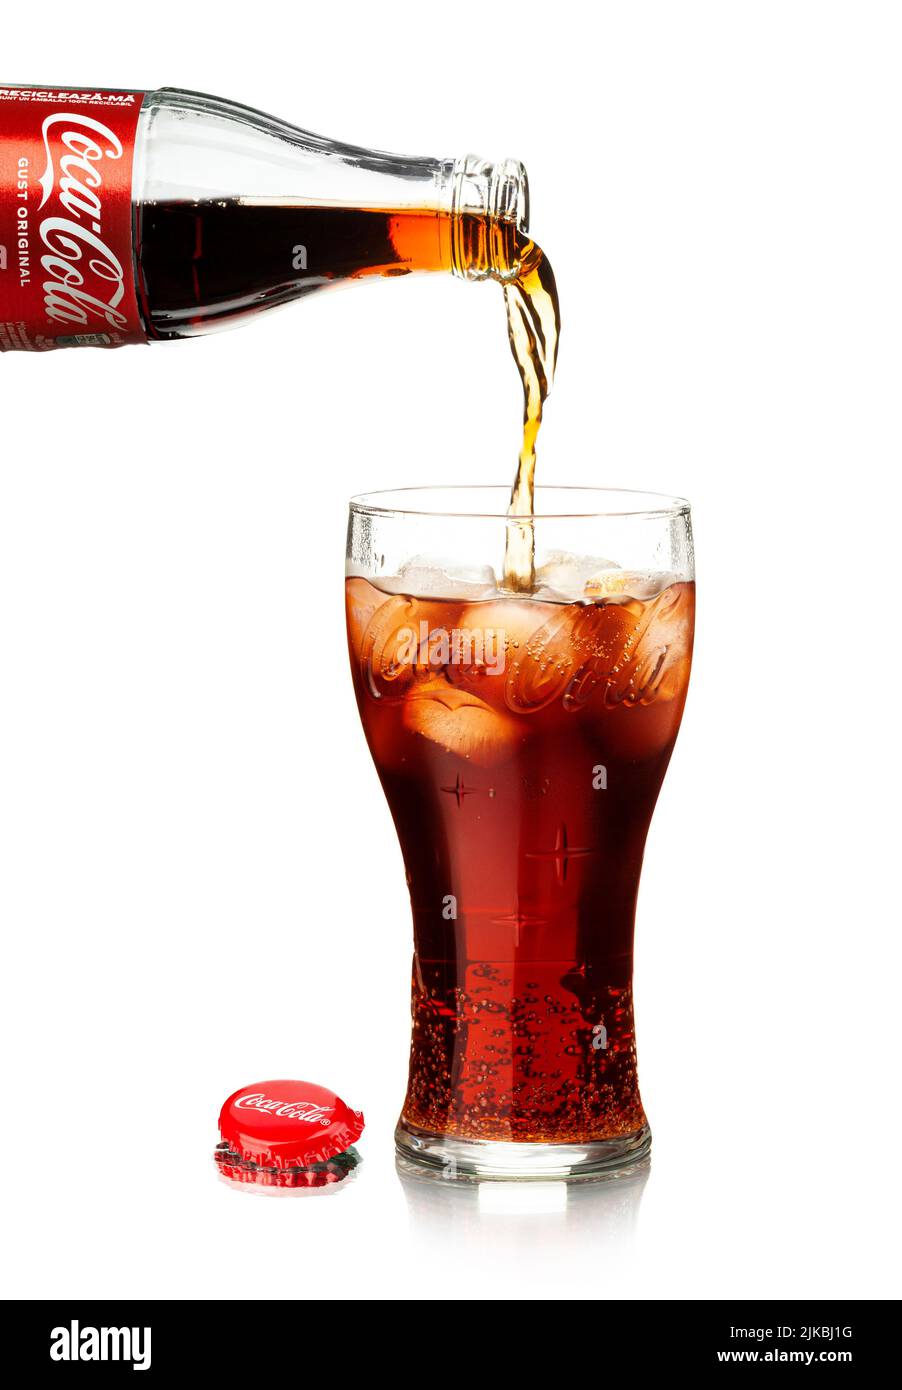 Chisinau, Moldova - July 31, 2022: Pouring cola from bottle into glass with splashing. Classic bottle Of Coca-Cola isolated on white background Stock Photo